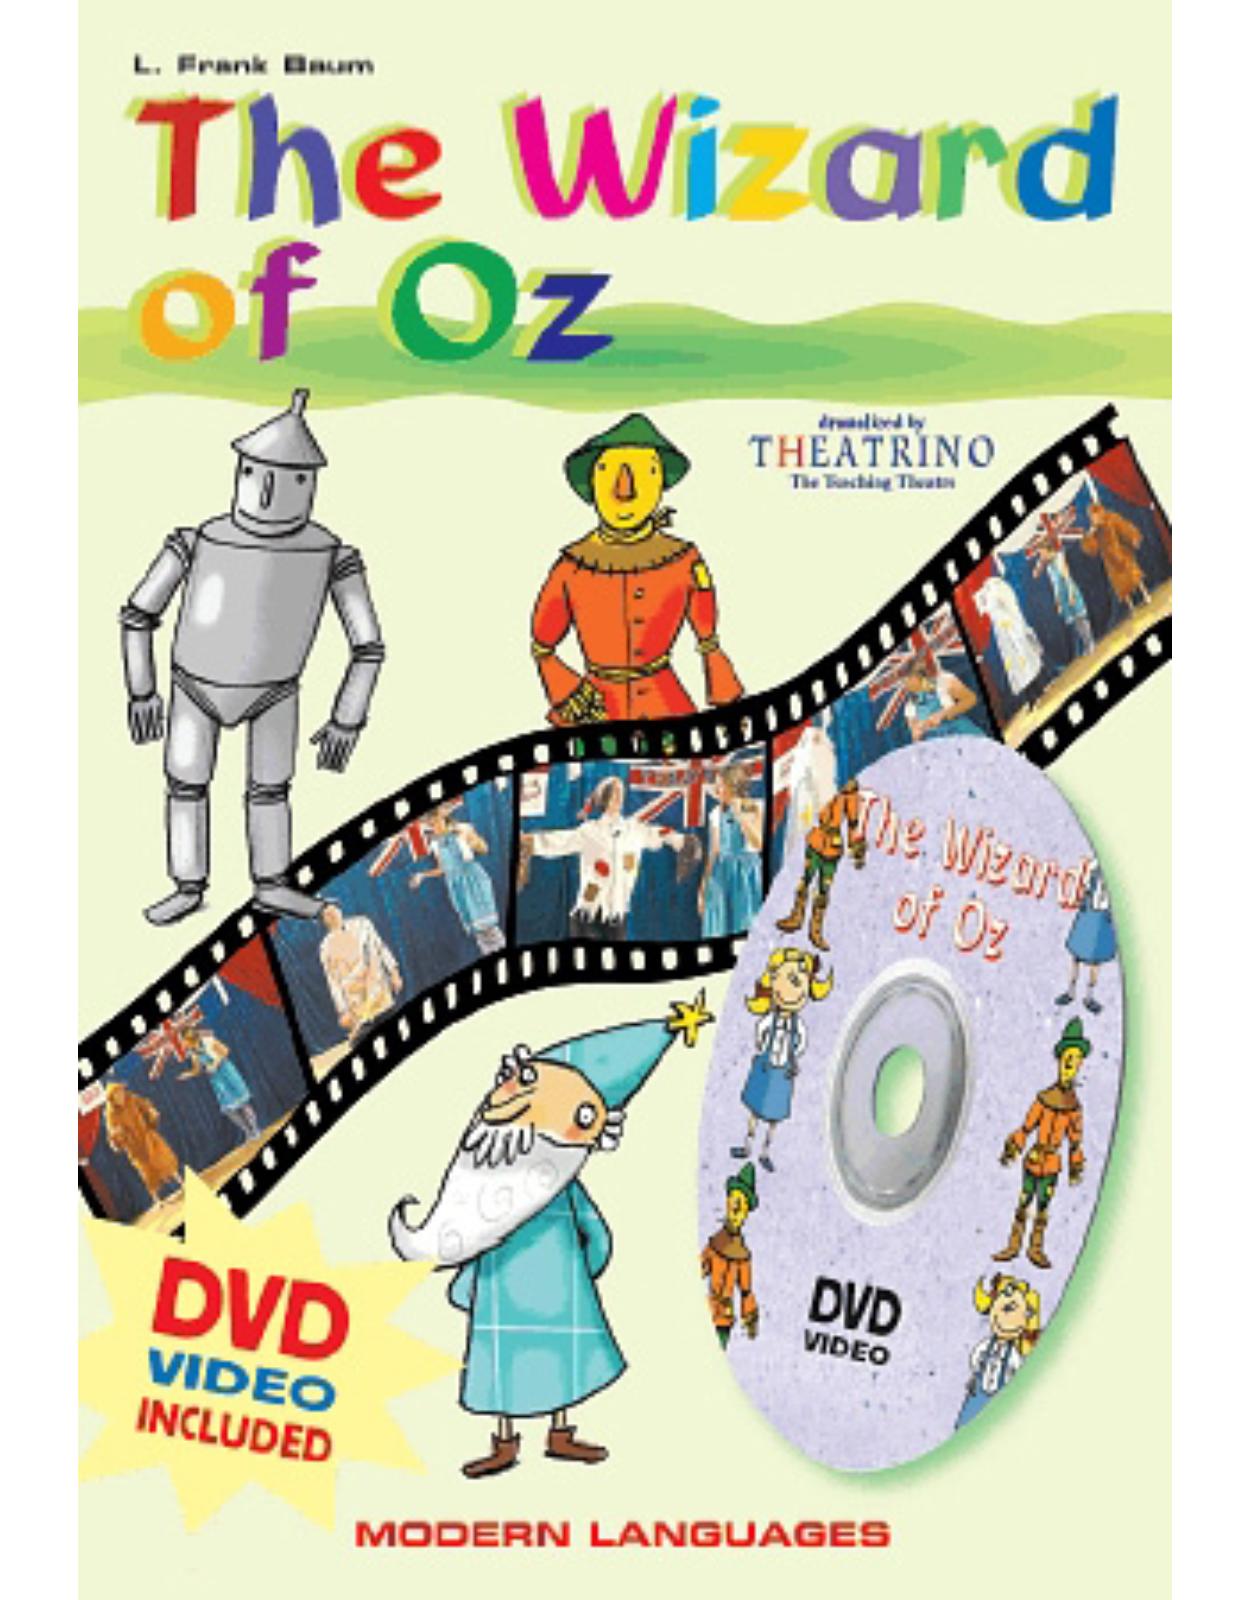 THE WIZARD OF OZ + DVD VIDEO